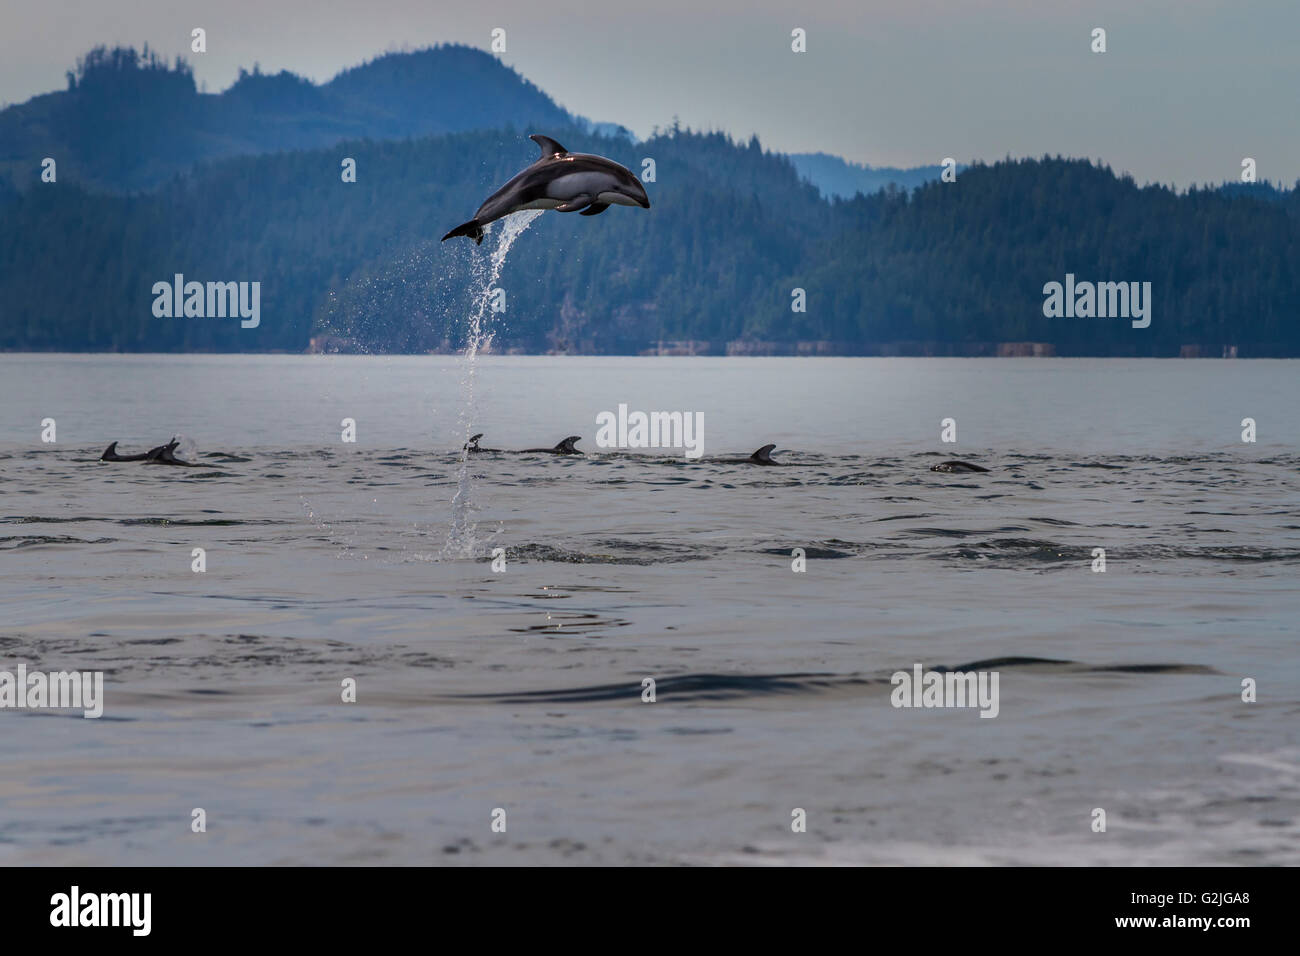 Pacific White Sided Dolphin (Lagenorhynchus obliquidens) jumping in Broughton Archipelago Marine Park in British Columbia Stock Photo